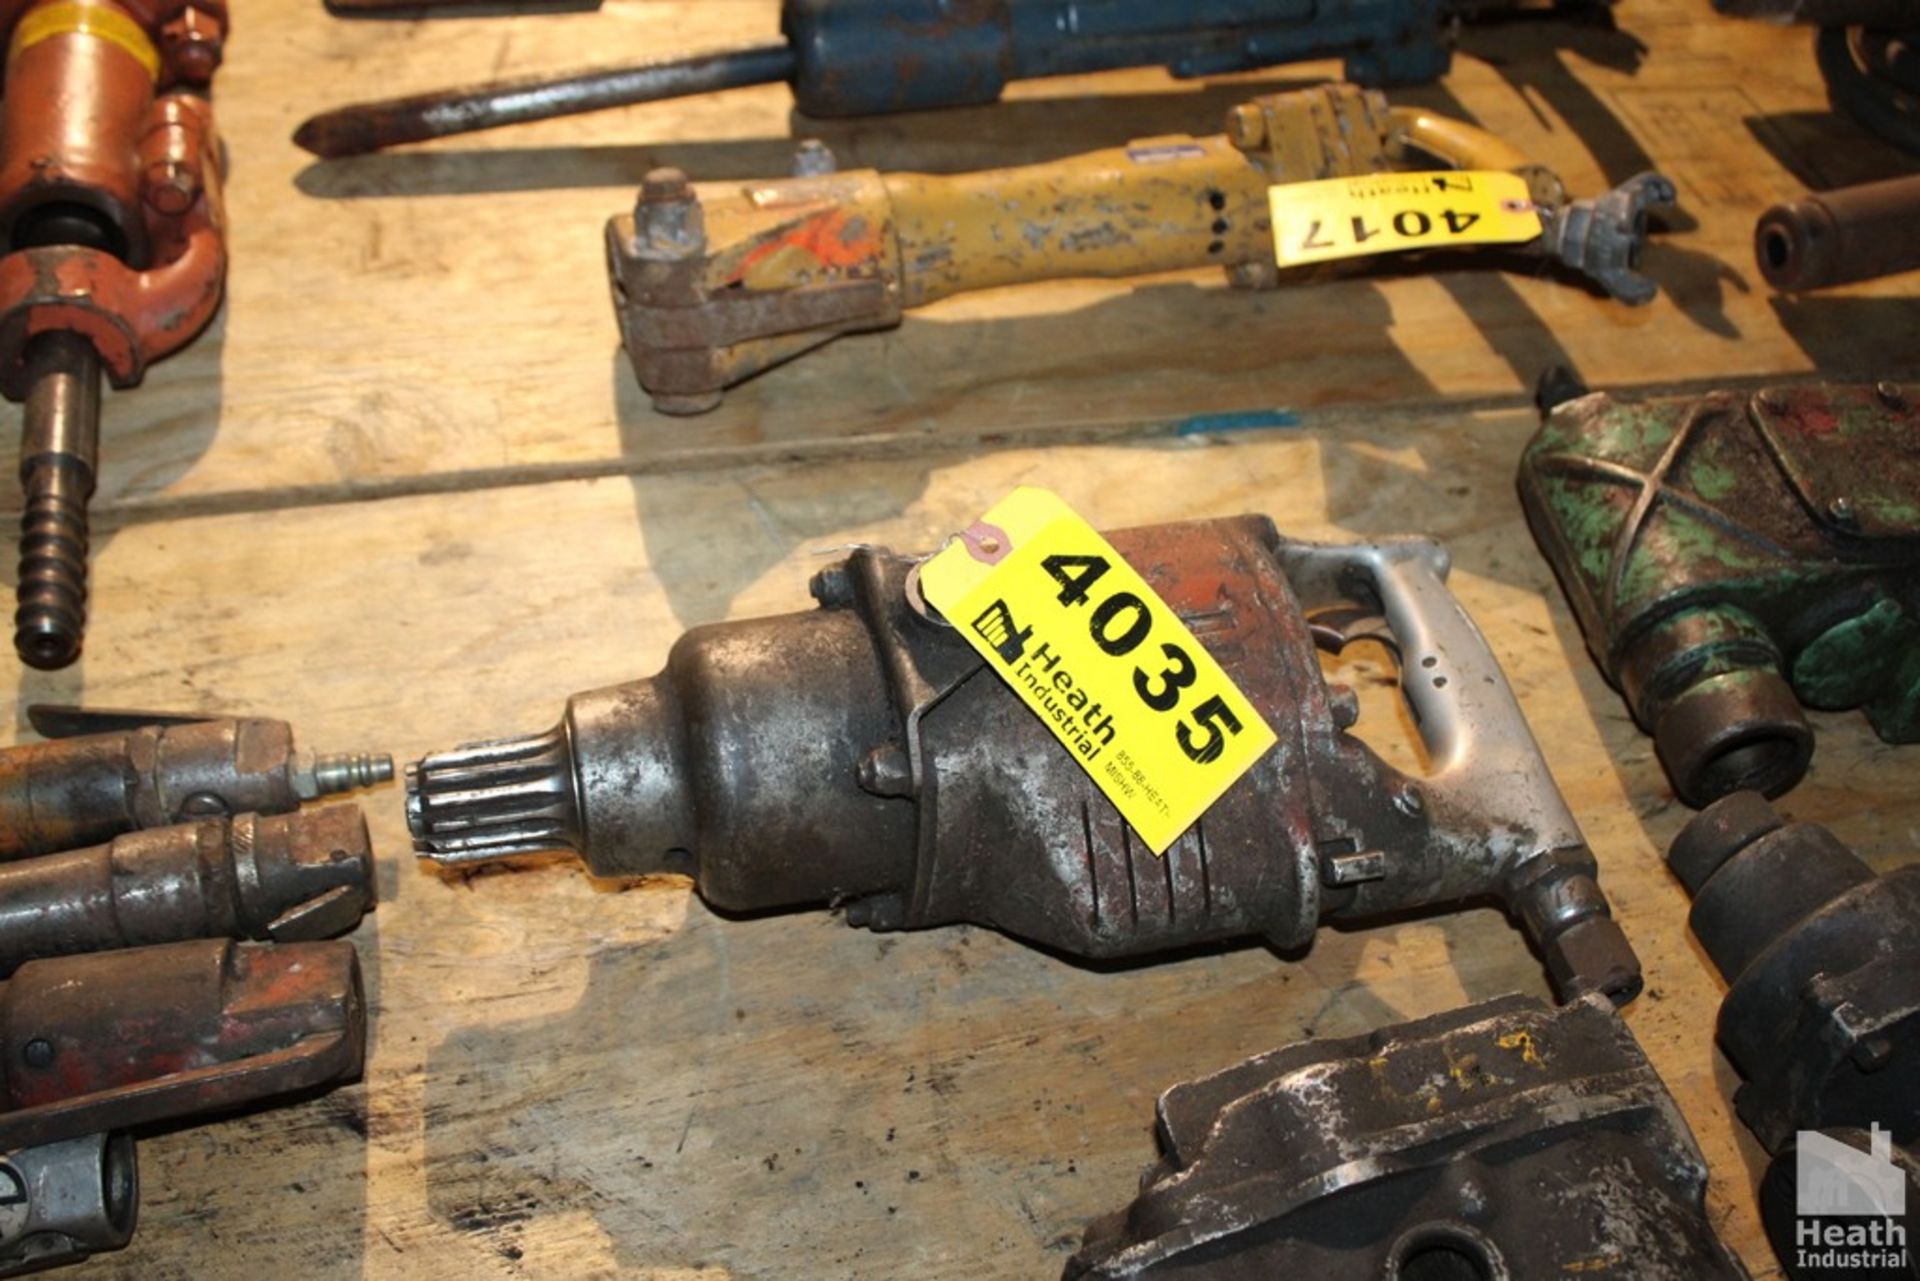 CLECO 1200 PNEUMATIC TOOL